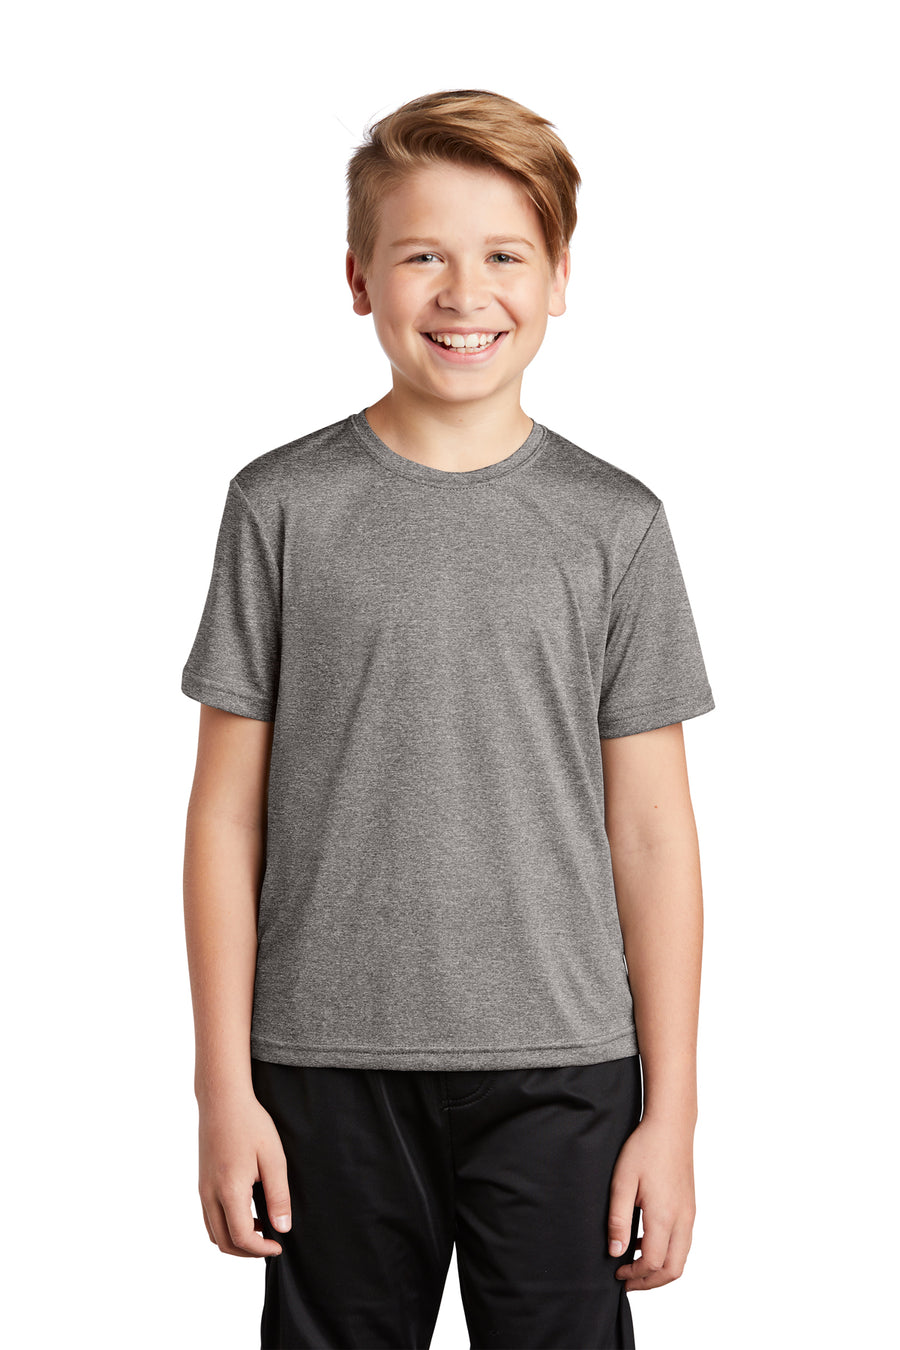 Youth 100% Polyester Moisture Wicking Heather T-Shirts (Short Sleeve)